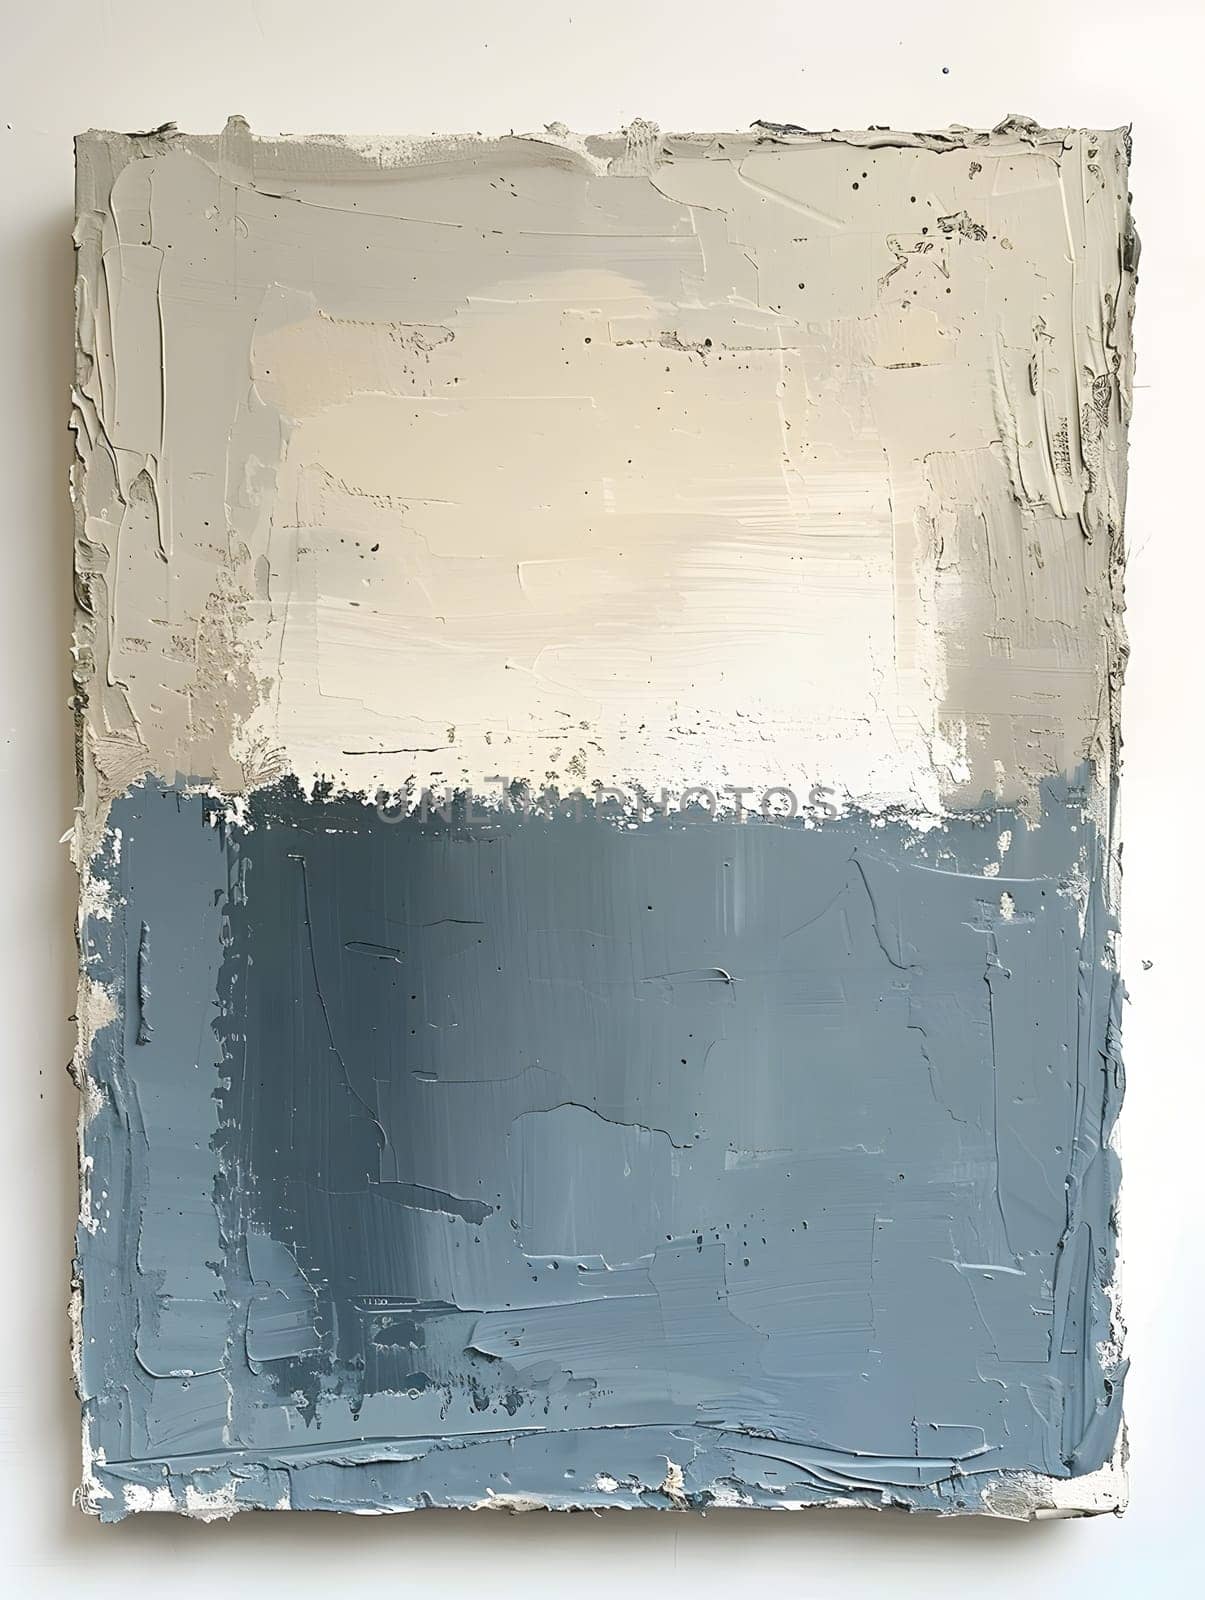 A blue and white painting decorates the white wall by Nadtochiy